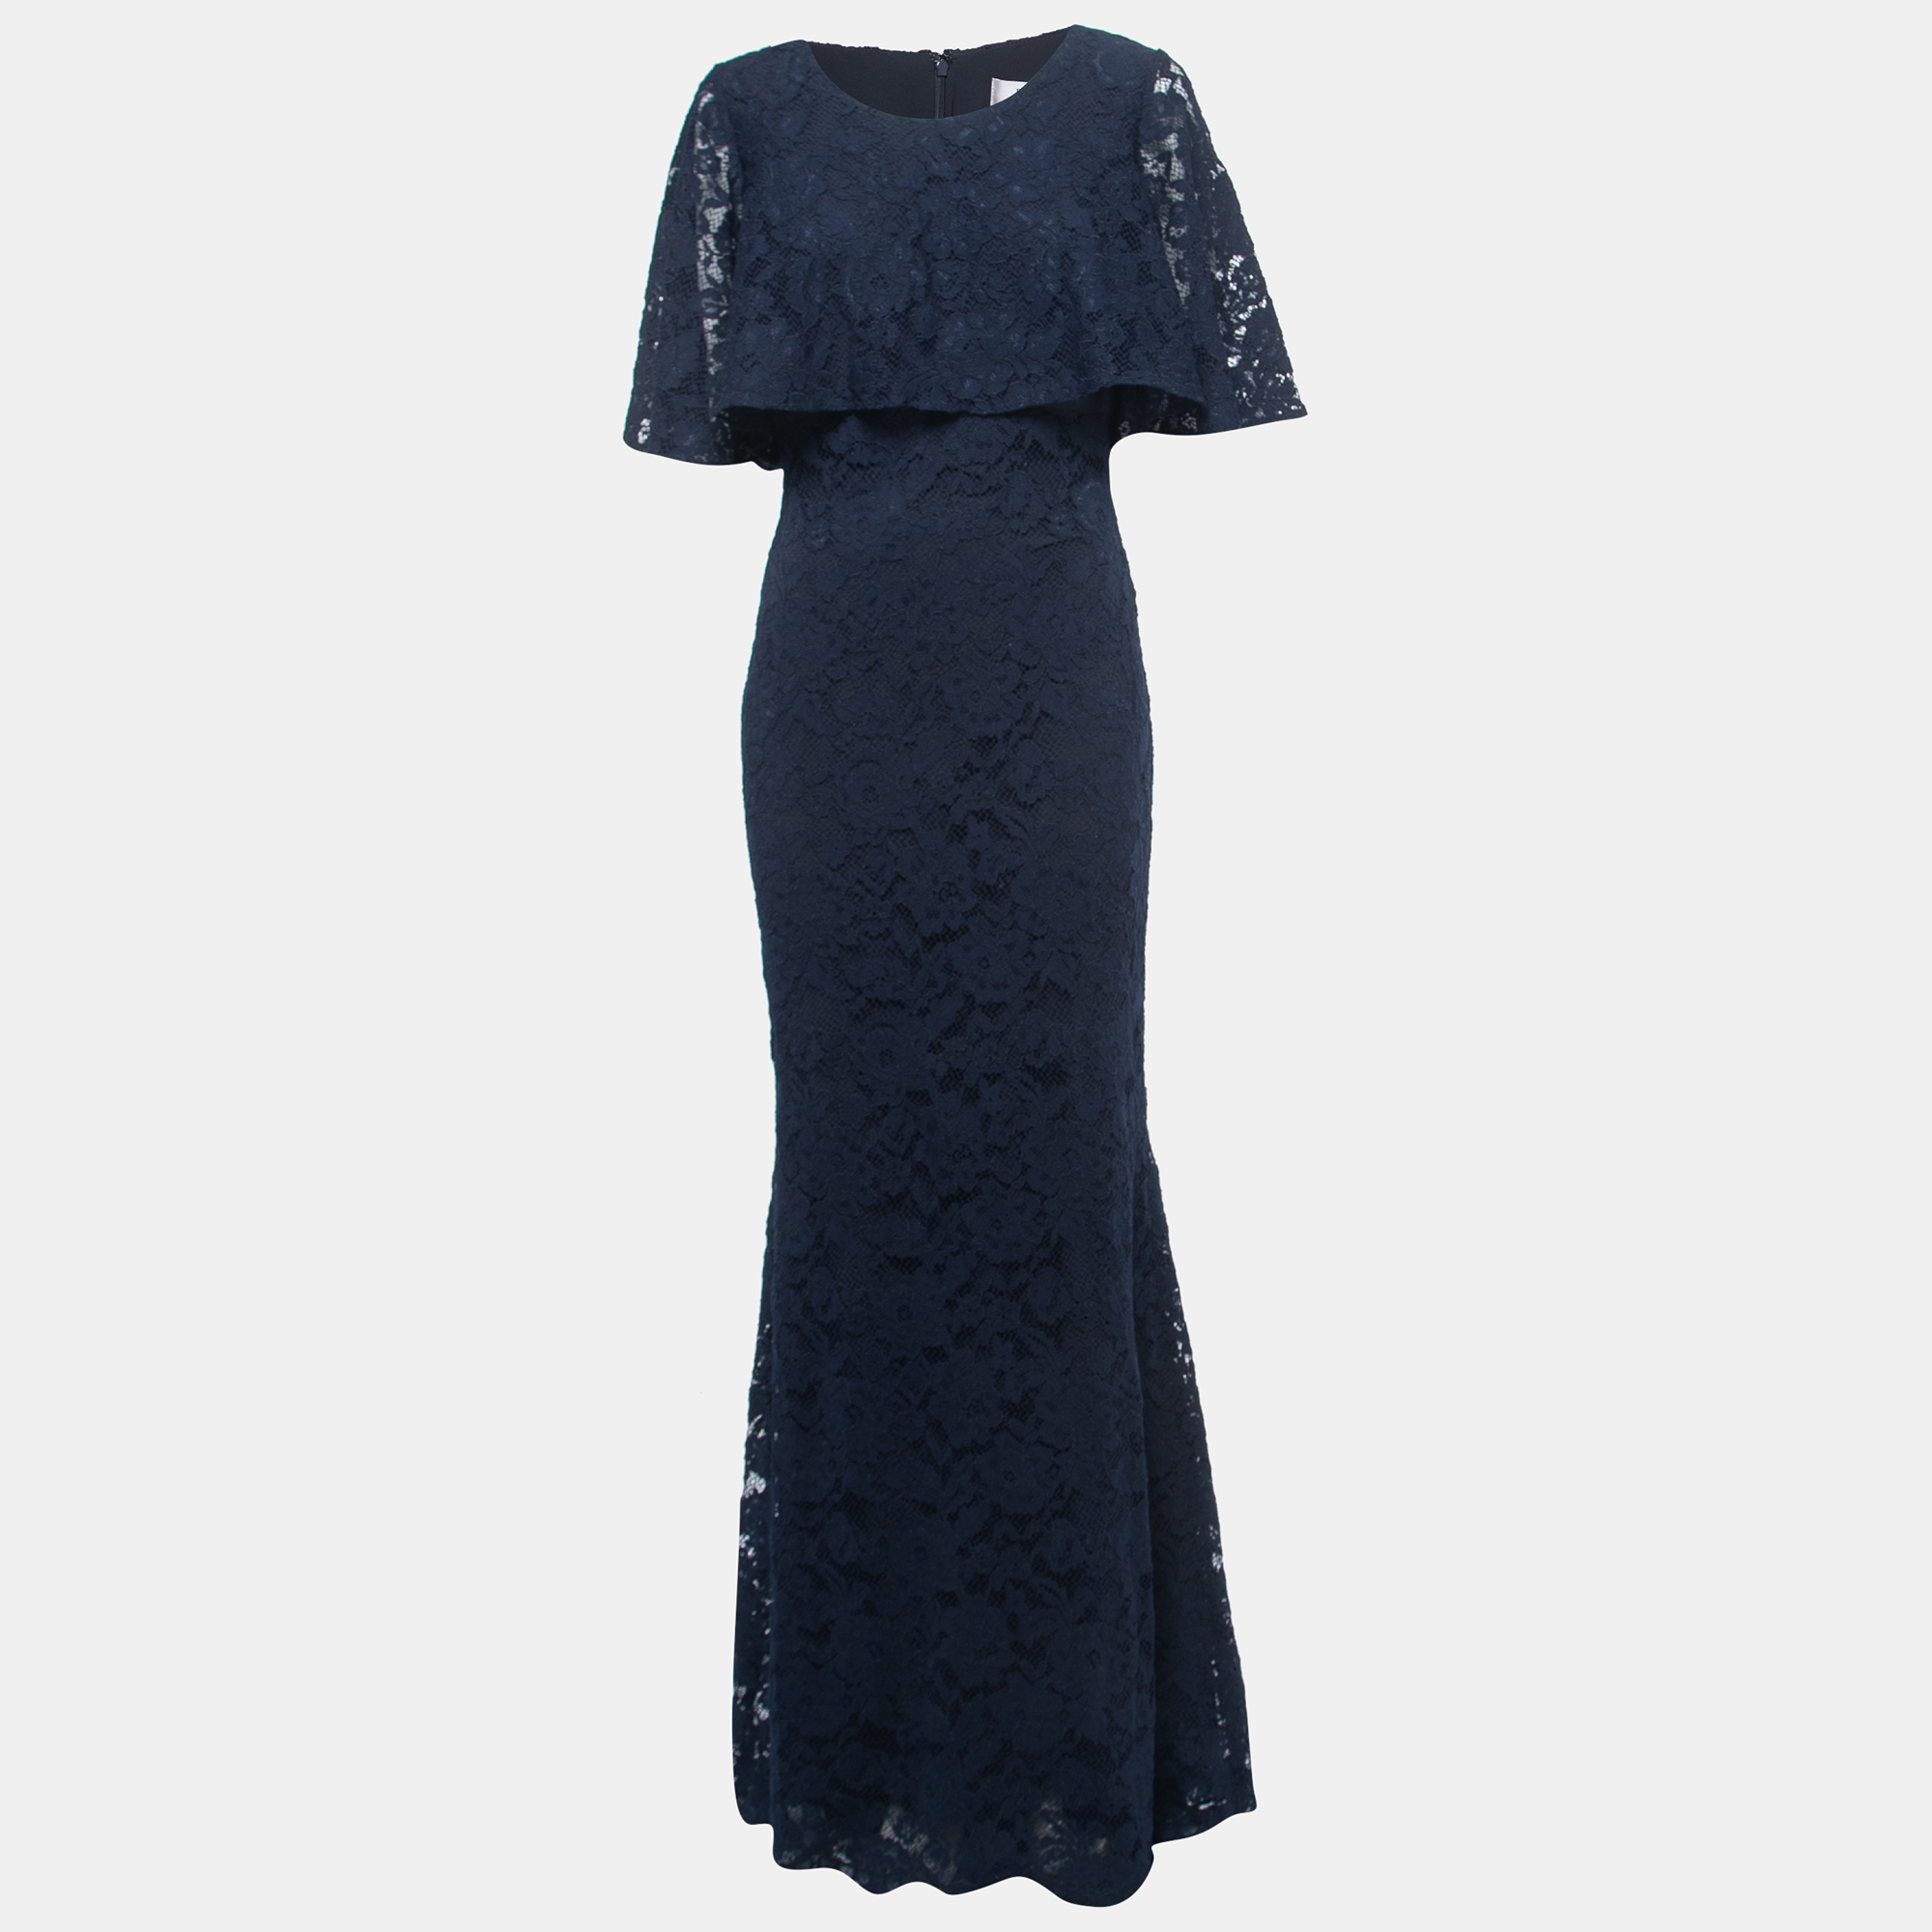 Badgley Mischka Navy Blue Lace Cape Gown M